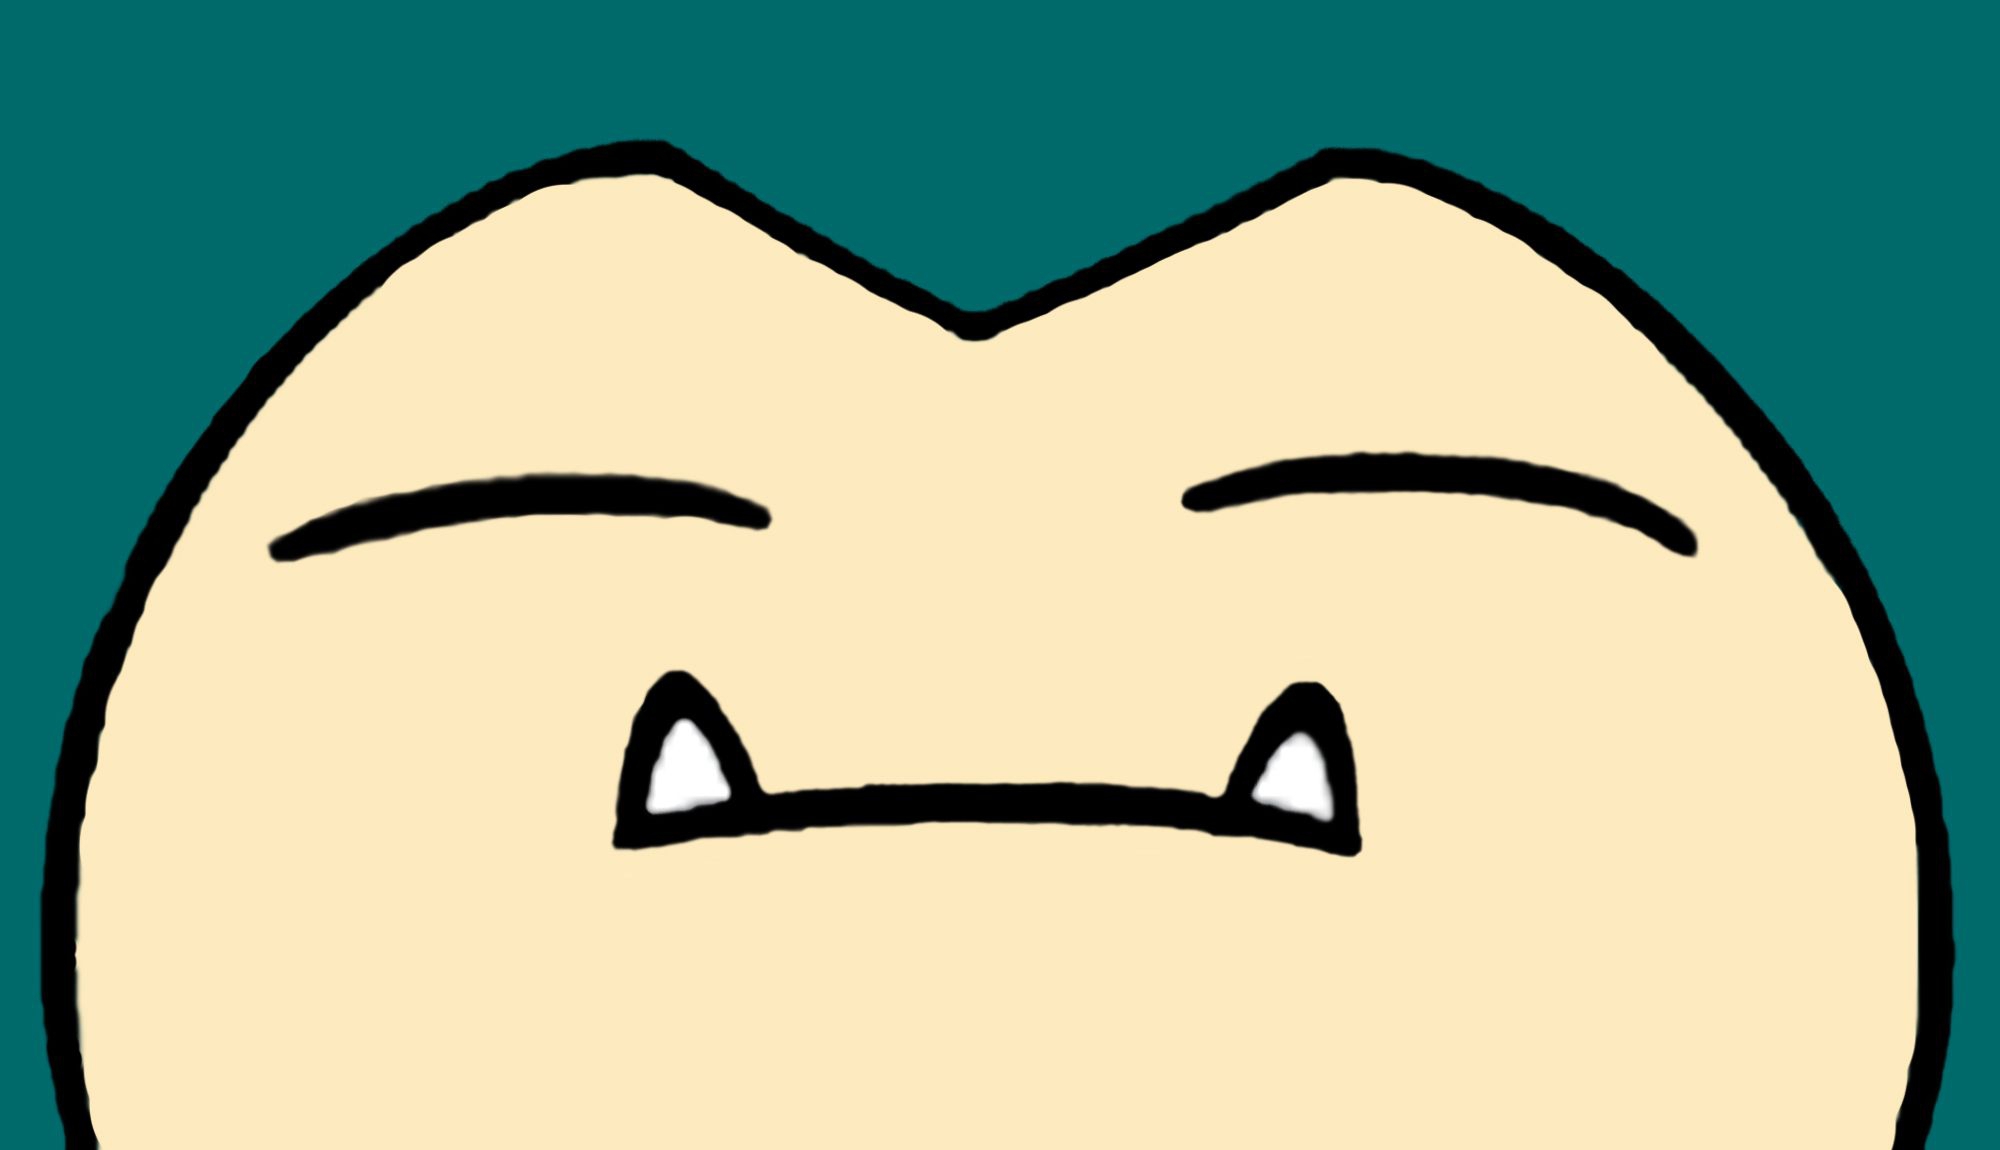 Snorlax Wallpapers Images Photos Pictures Backgrounds